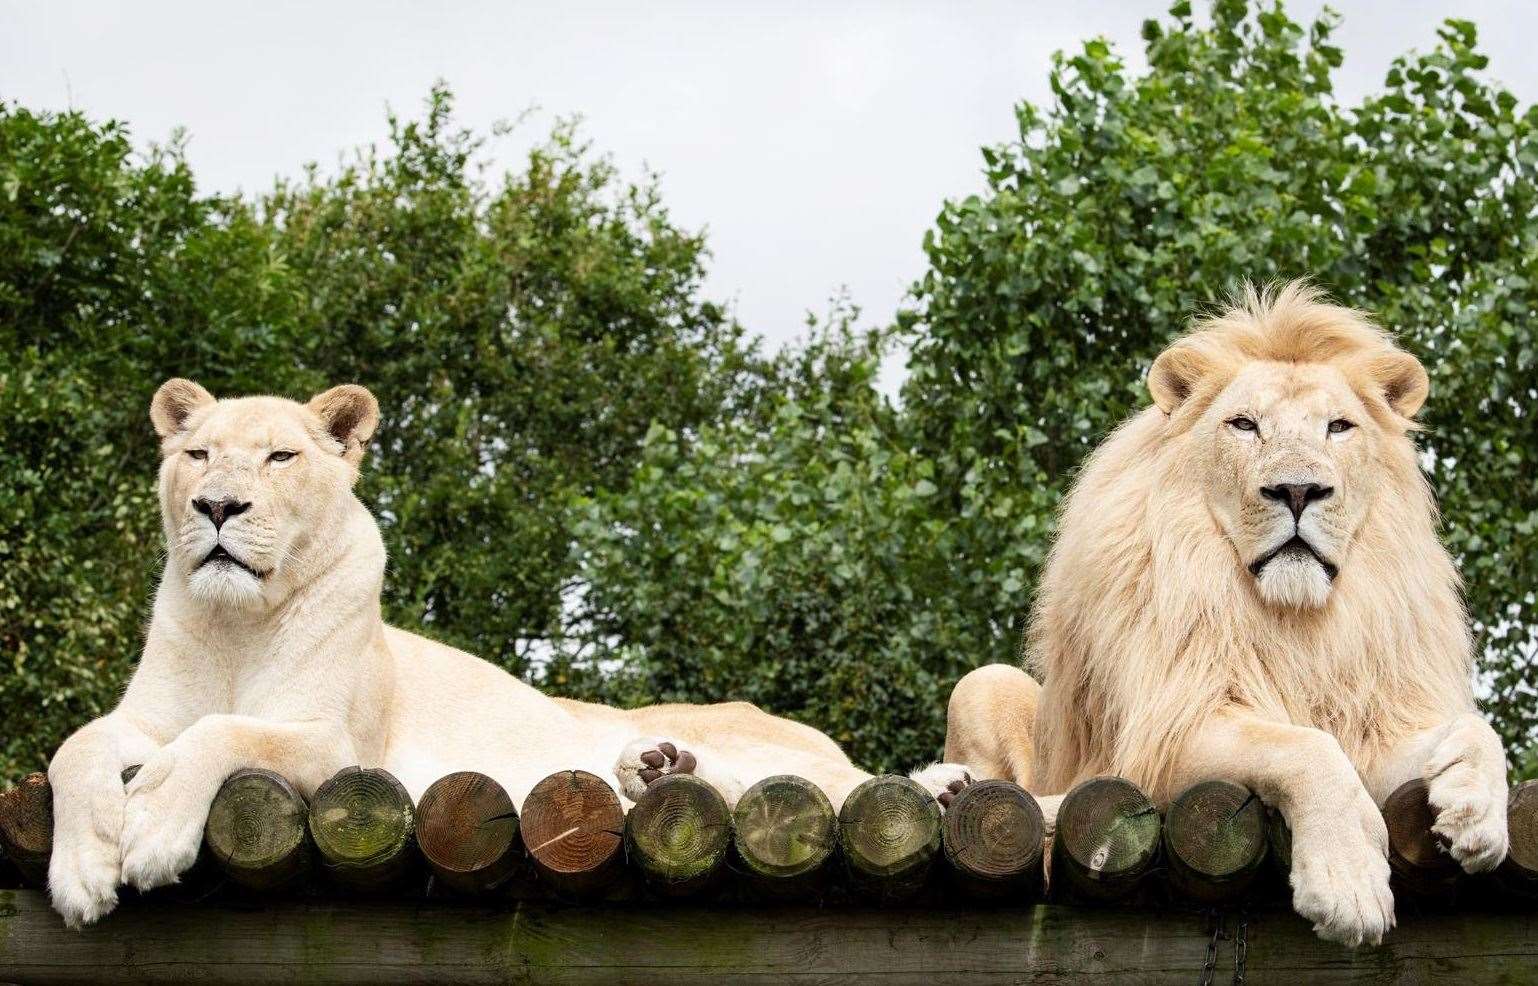 The Big Cat Sanctuary's white lioness Imara with her brother Ngozi. Picture: The Big Cat Sanctuary